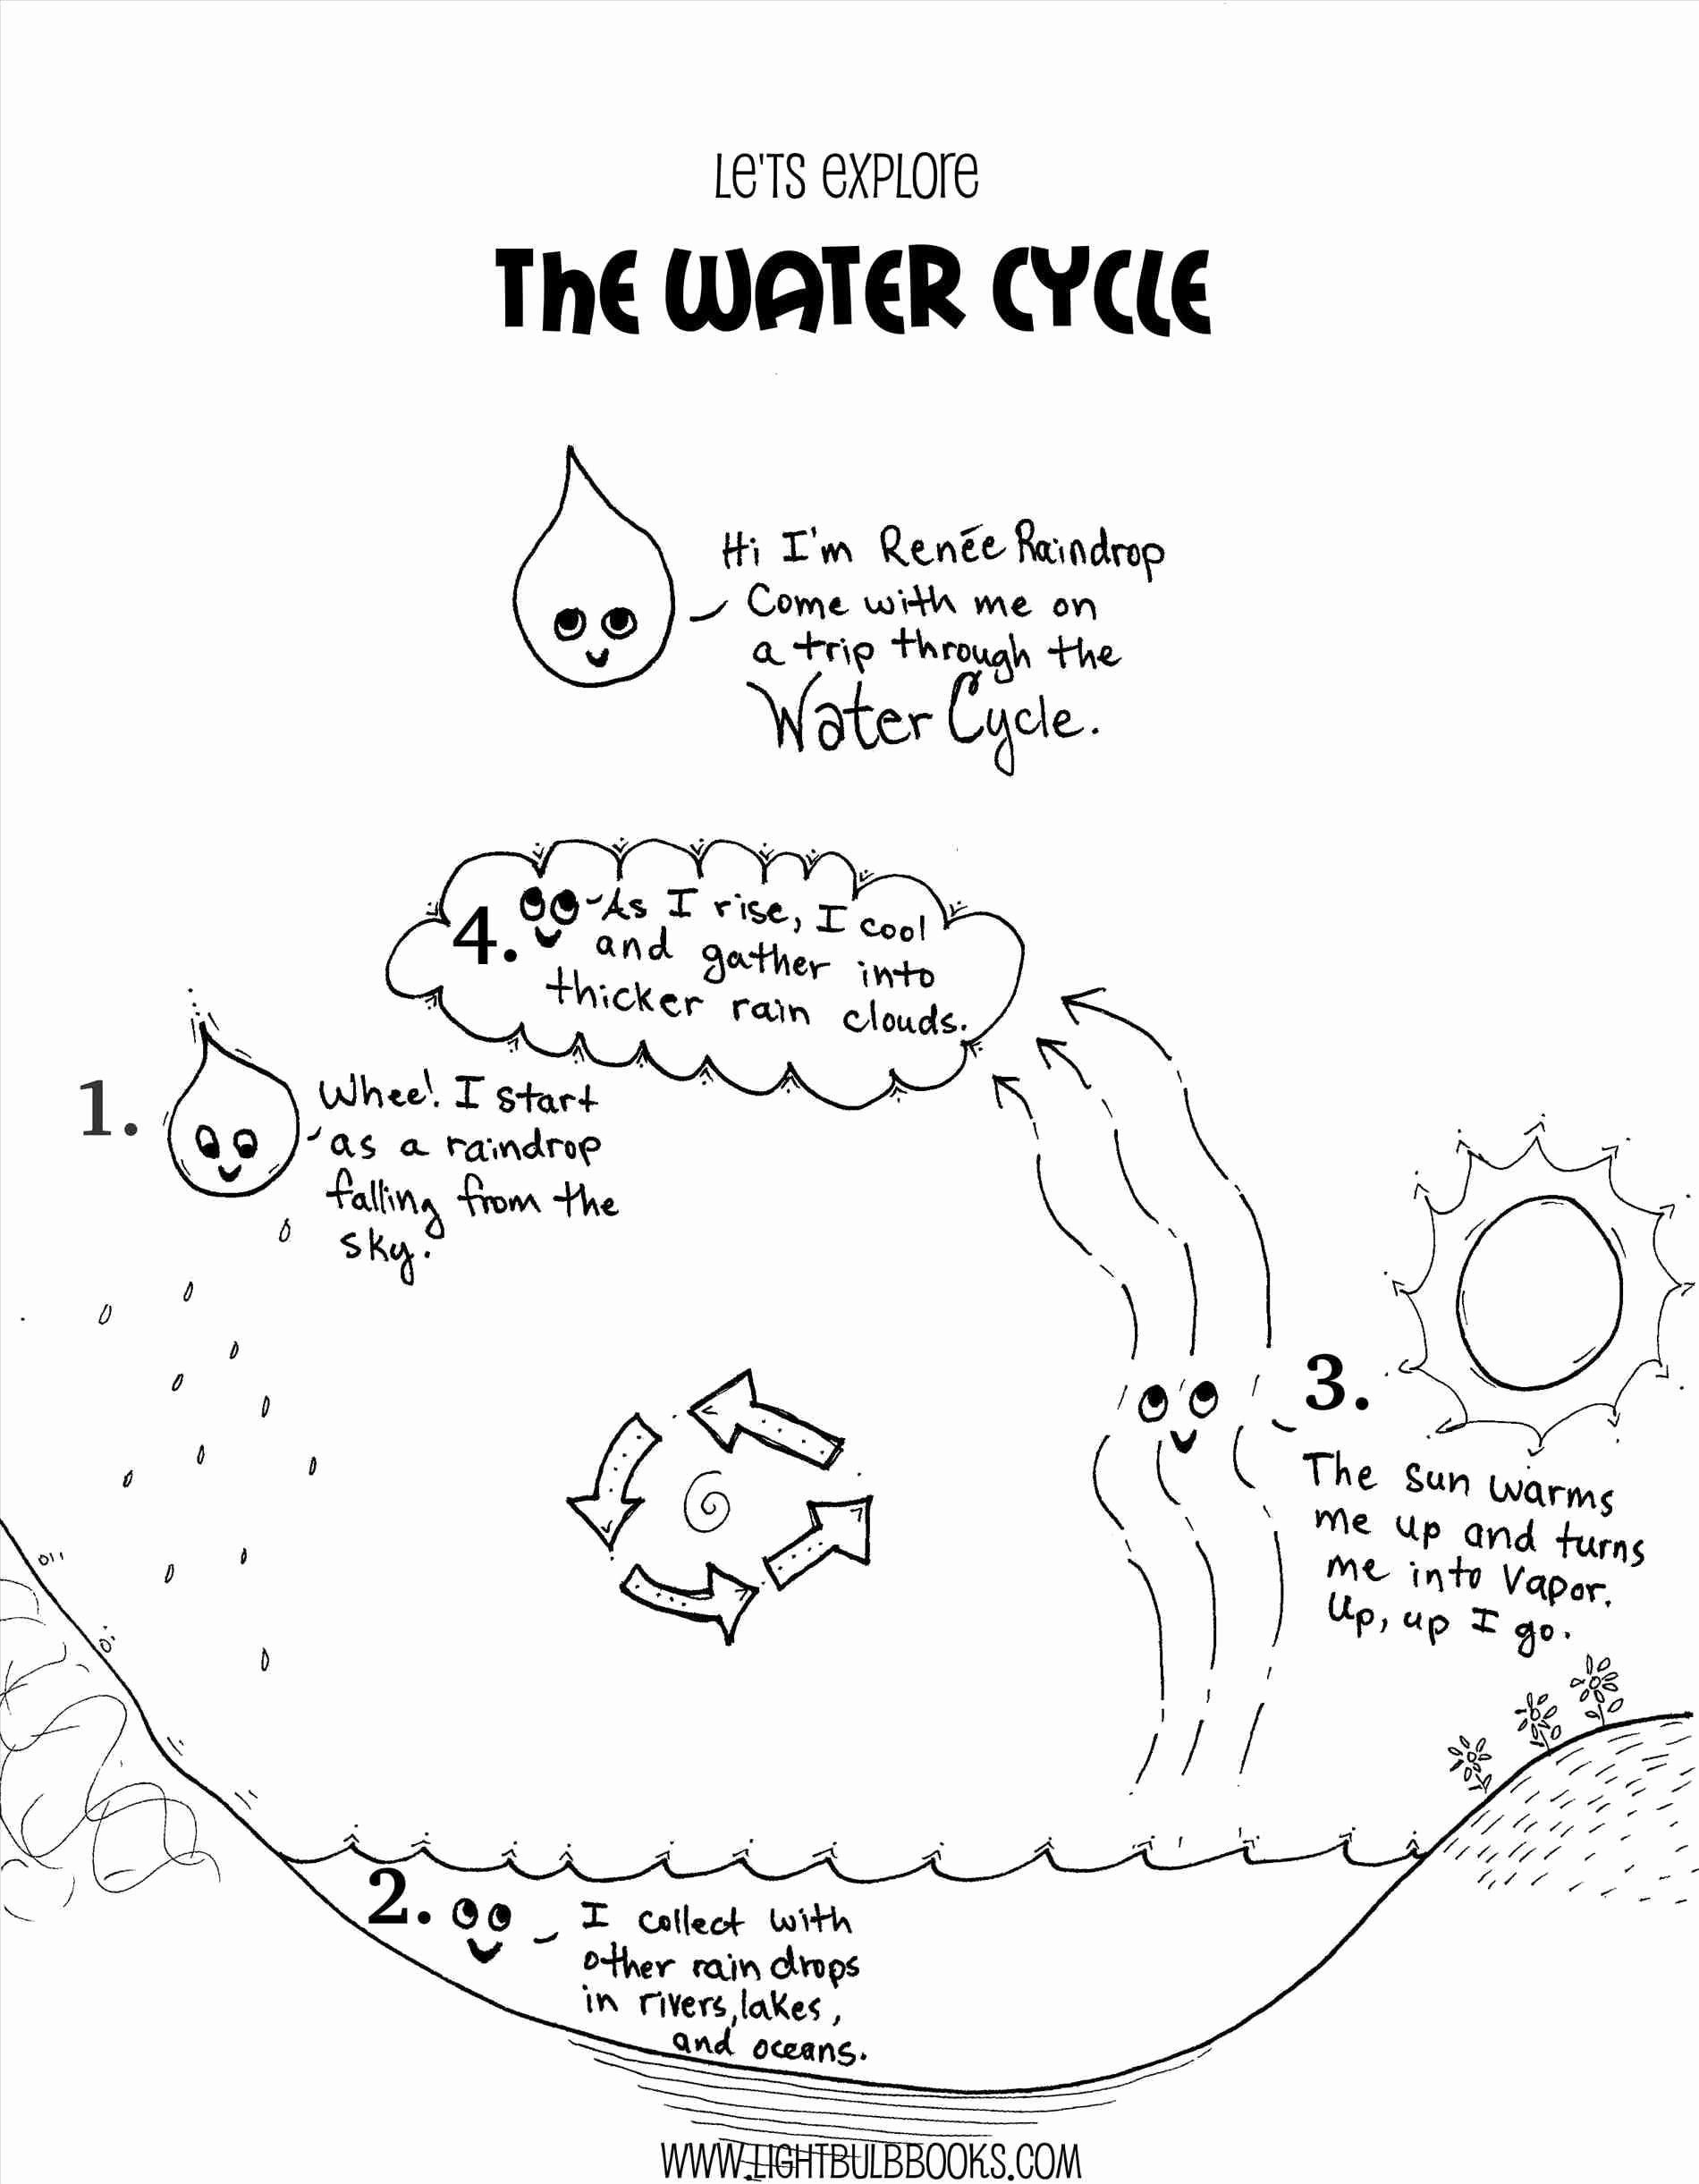 Carbon Cycle Diagram Worksheet Pin On top Coloring Pages Ideas Printable